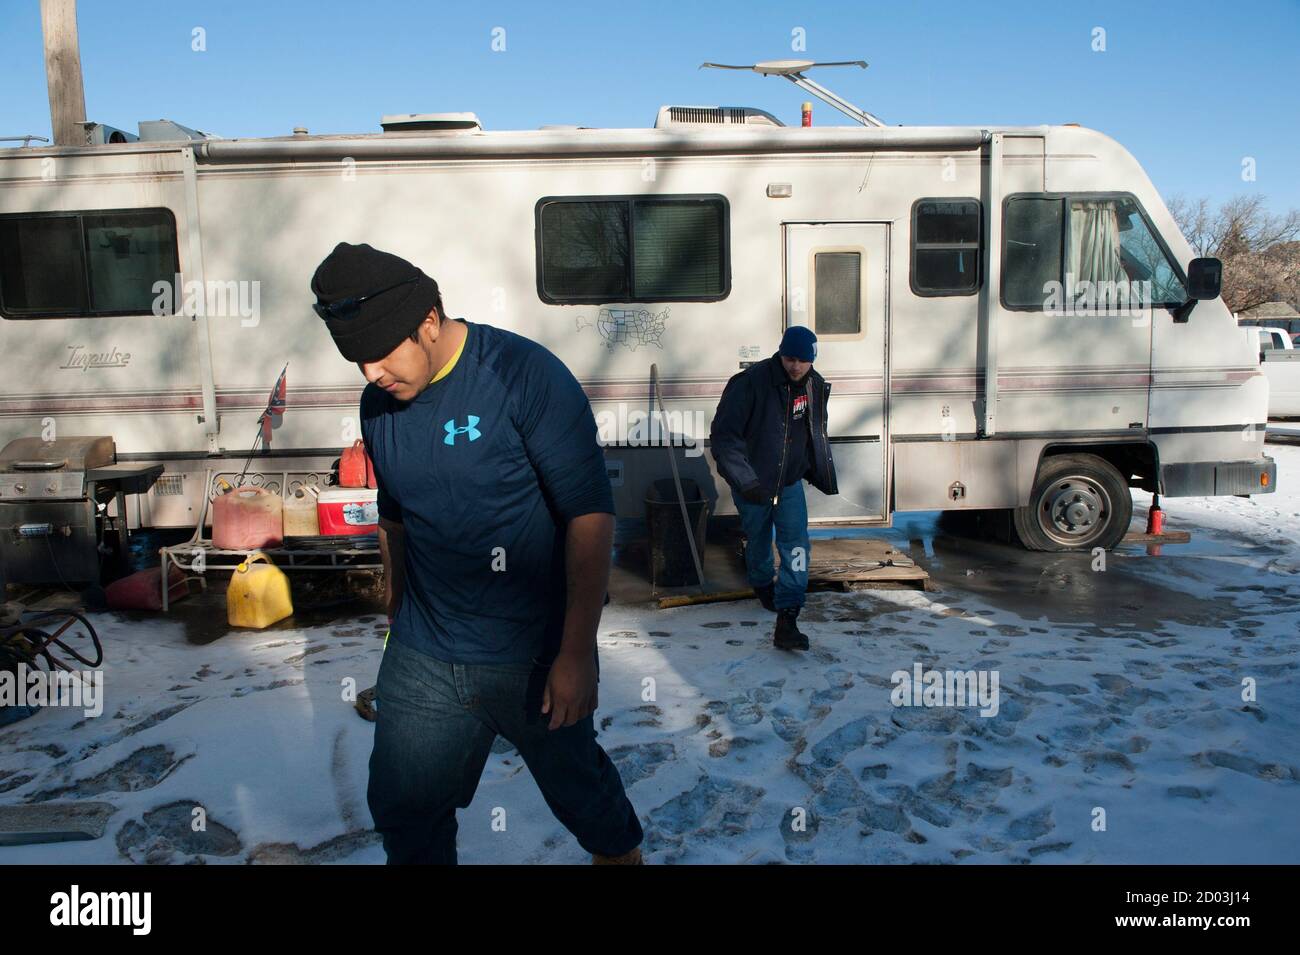 Bazileo Hernandez (L) and his friend Jeff Williamson leave an RV they are staying in, in Williston, North Dakota January 23, 2015. Like so many before them, Terra Green, Jeff Williamson and Bazileo Hernandez came to North Dakota's oil country seeking a better life. They just came too late. Itinerant, unskilled workers could as recently as last spring show up in the No. 2 U.S. oil producing state and vie for salaries north of $100,000 per year with guaranteed housing. The steep drop in oil prices has changed that. After trying unsuccessfully for over a month to find work, the friends decided to Stock Photo